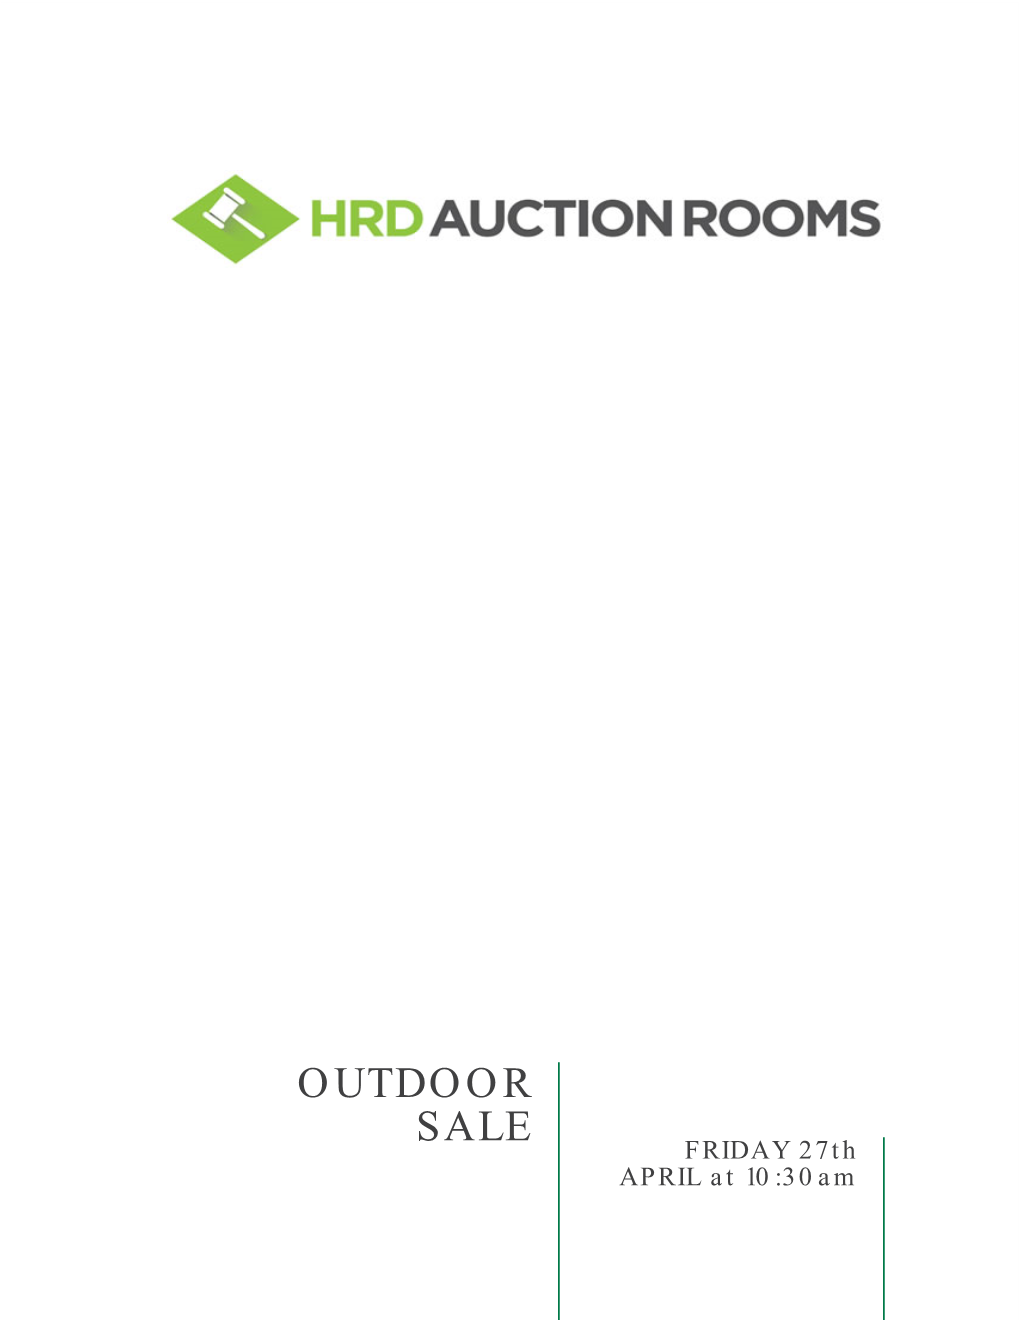 OUTDOOR SALE FRIDAY 27Th APRIL at 10:30Am OUTDOOR SALE